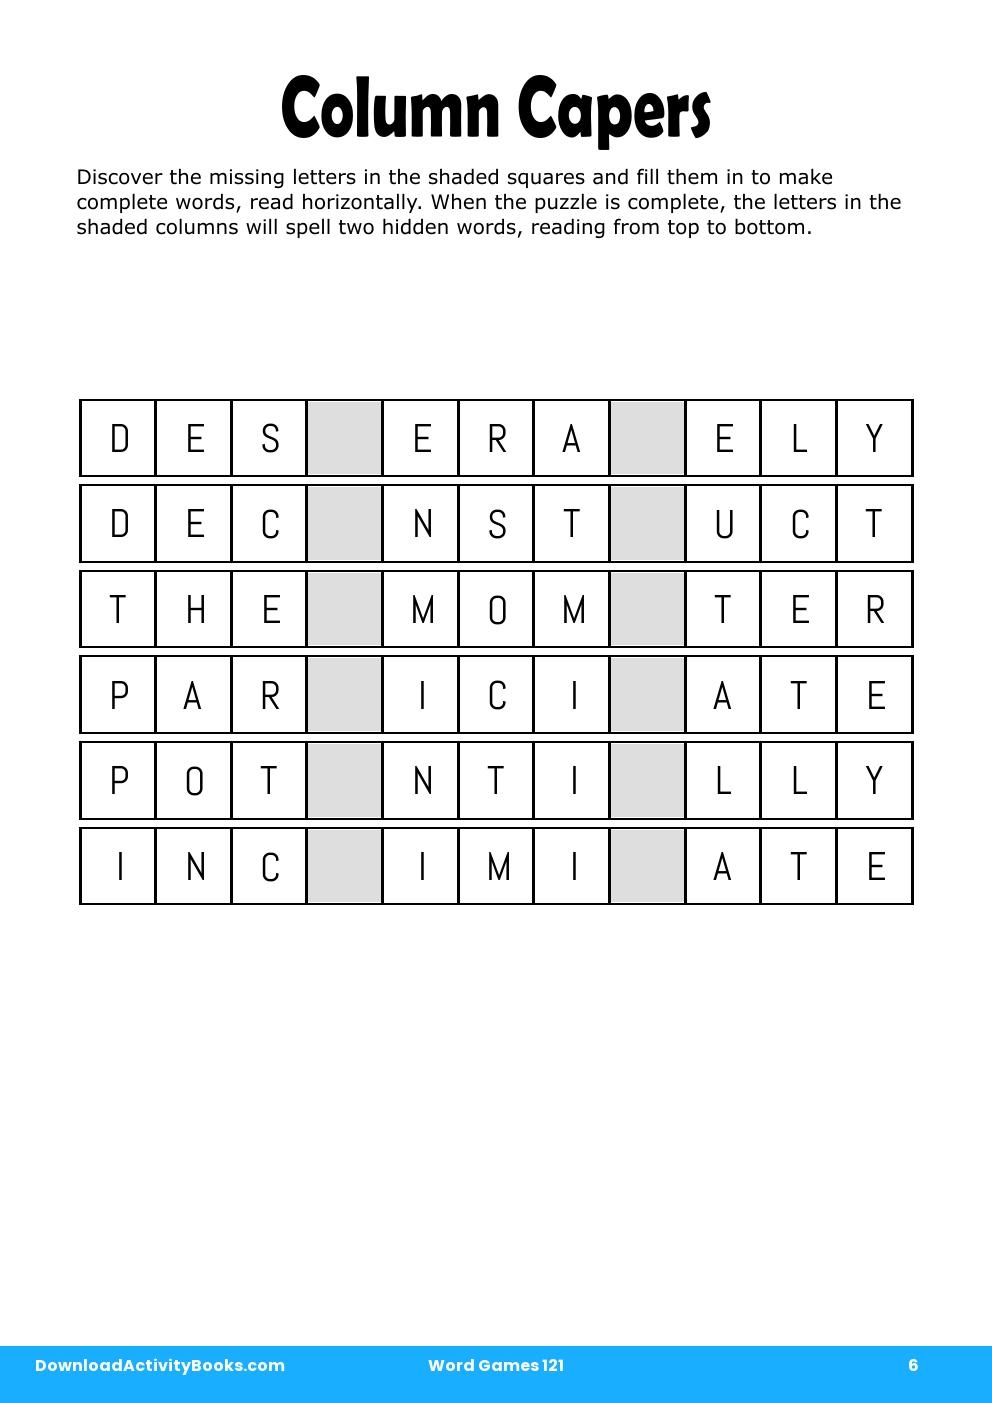 Column Capers in Word Games 121